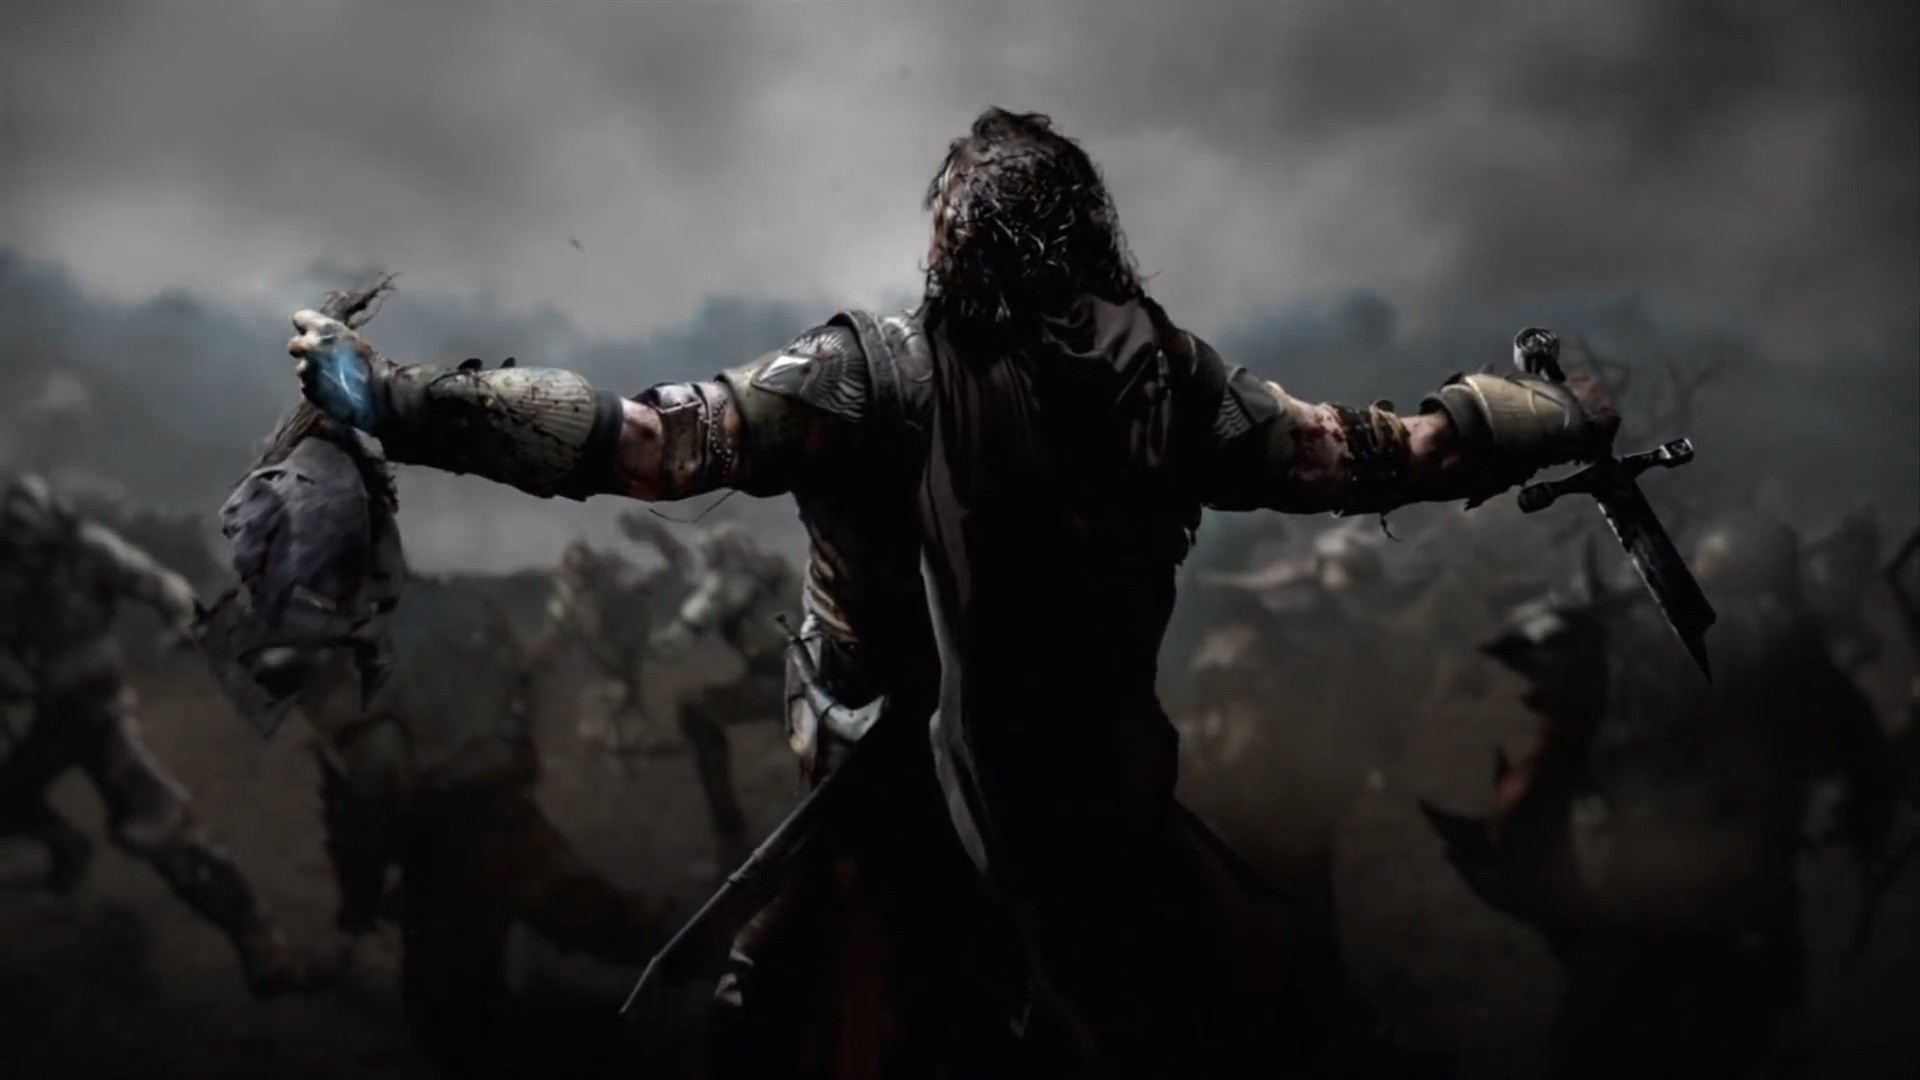 1920x1080 Wallpaper from Middle-earth: Shadow of Mordor